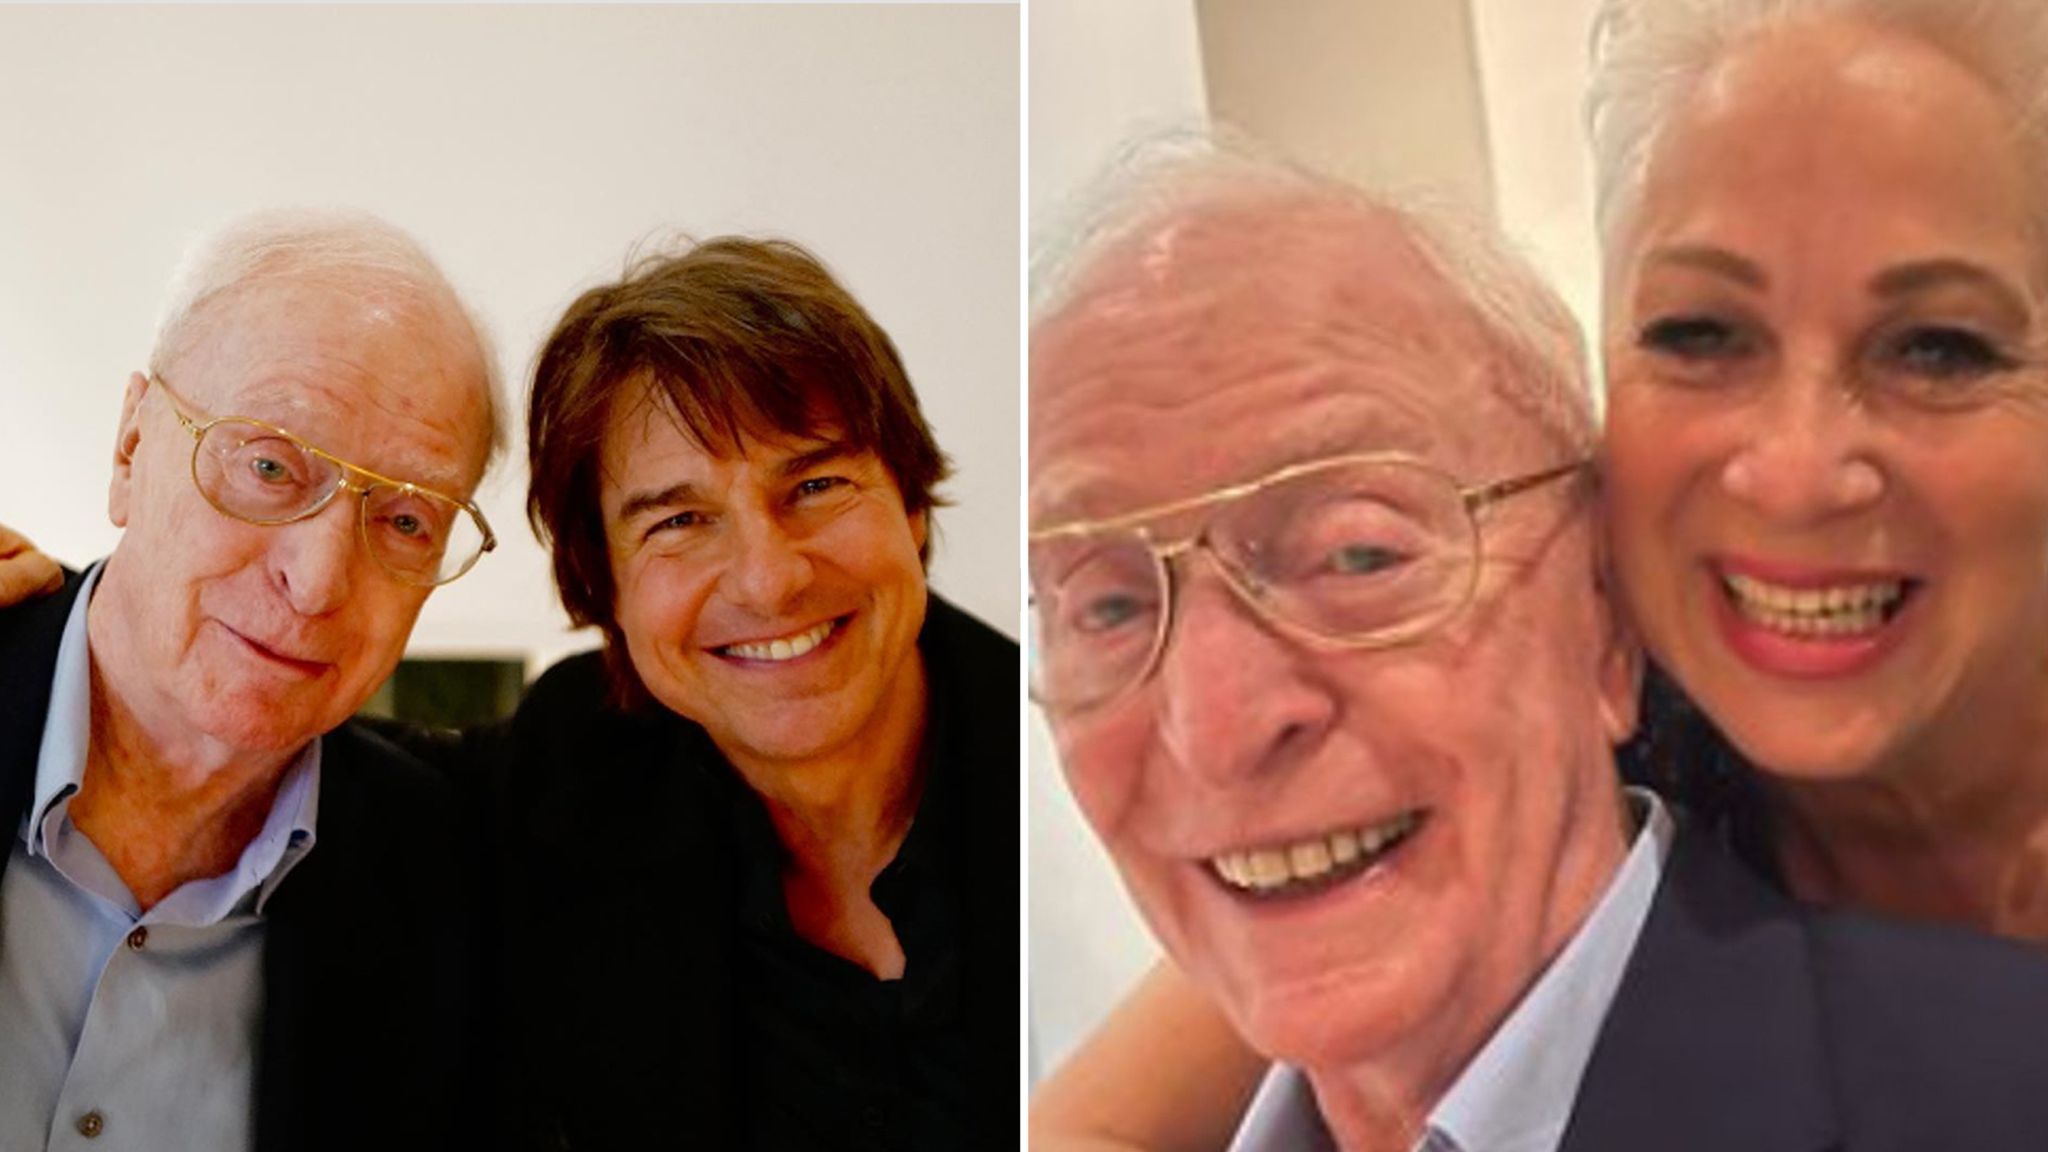 Sir Michael Caine celebrates 90th birthday with Tom Cruise and